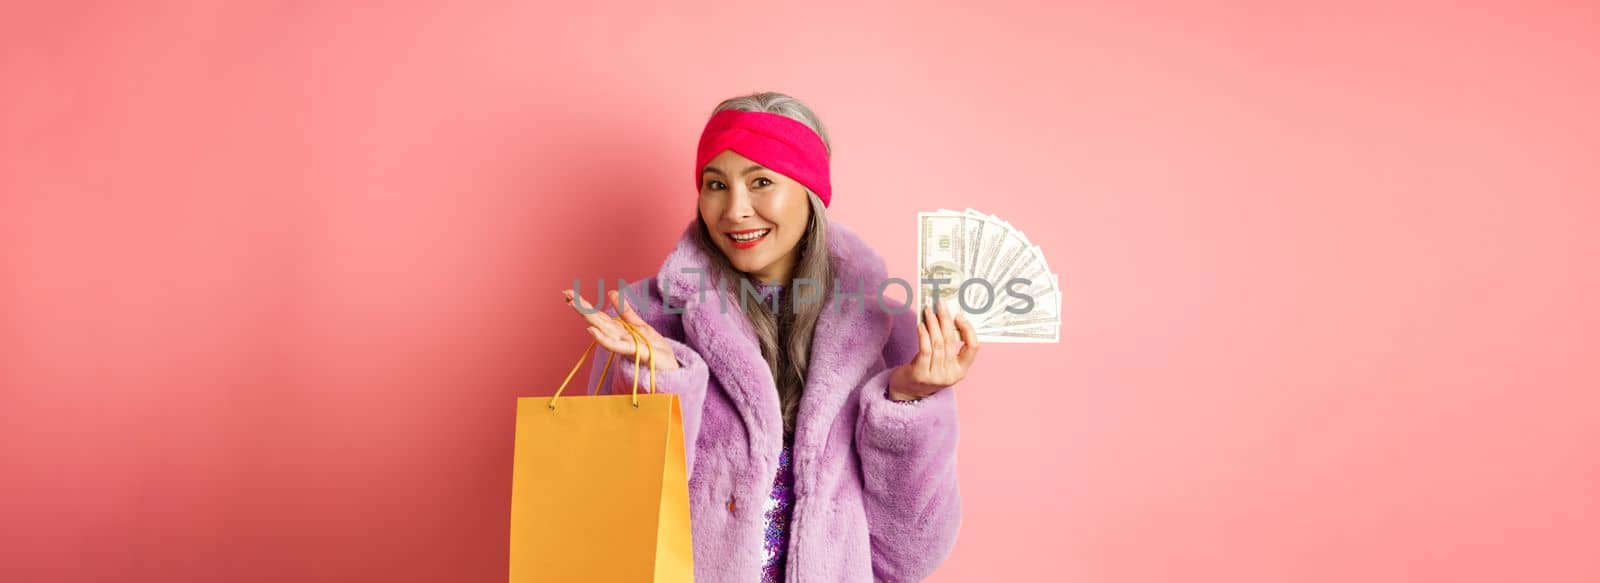 Rich and stylish grandmother going on shopping with dollars, holding paper bag and smiling carefree, standing over pink backgrund.